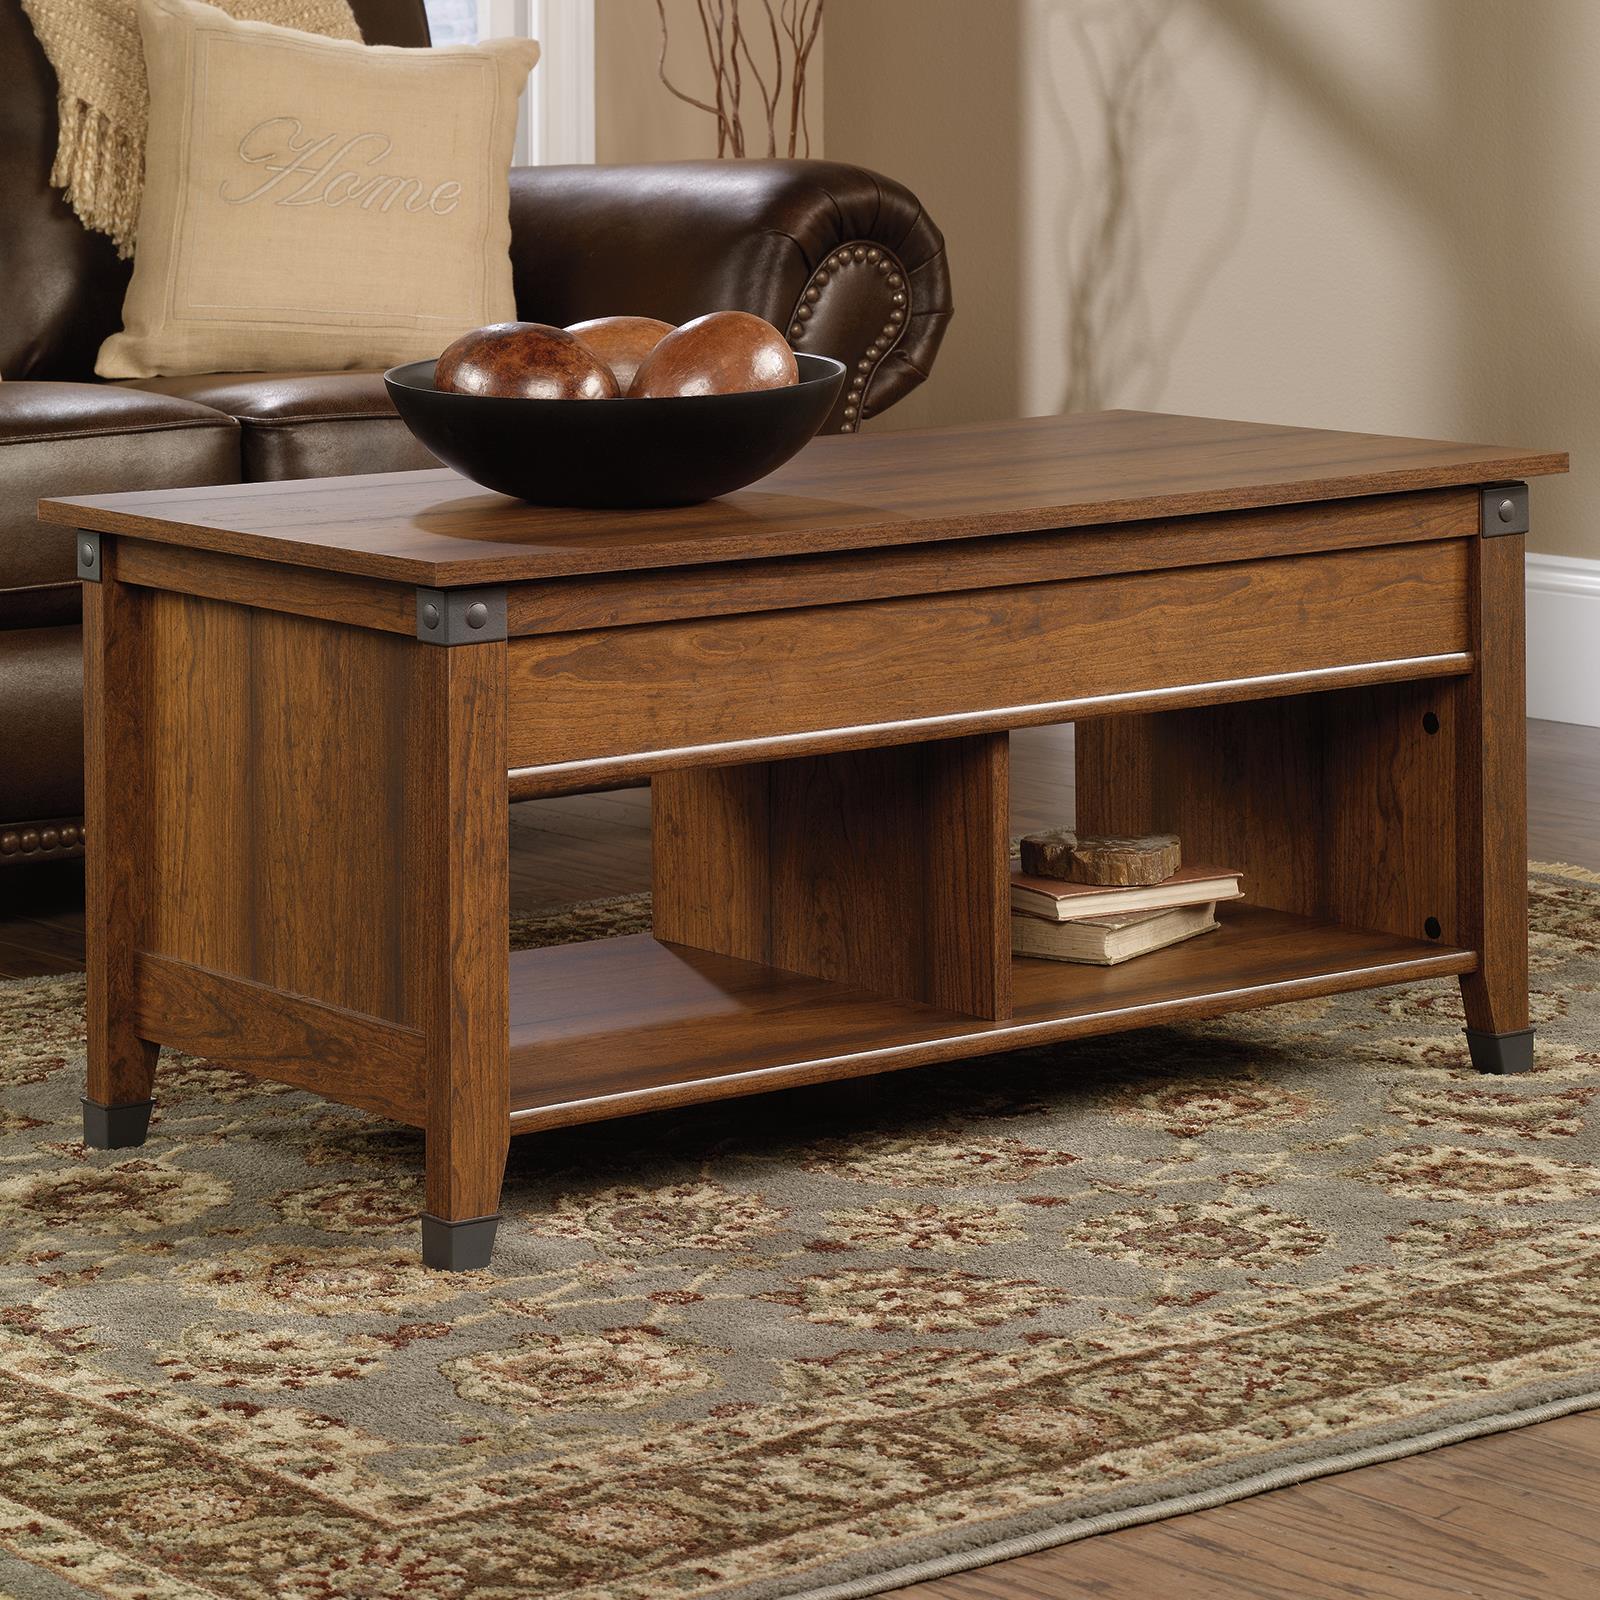 Sauder Carson Forge Collection Side Table in Washington Cherry 